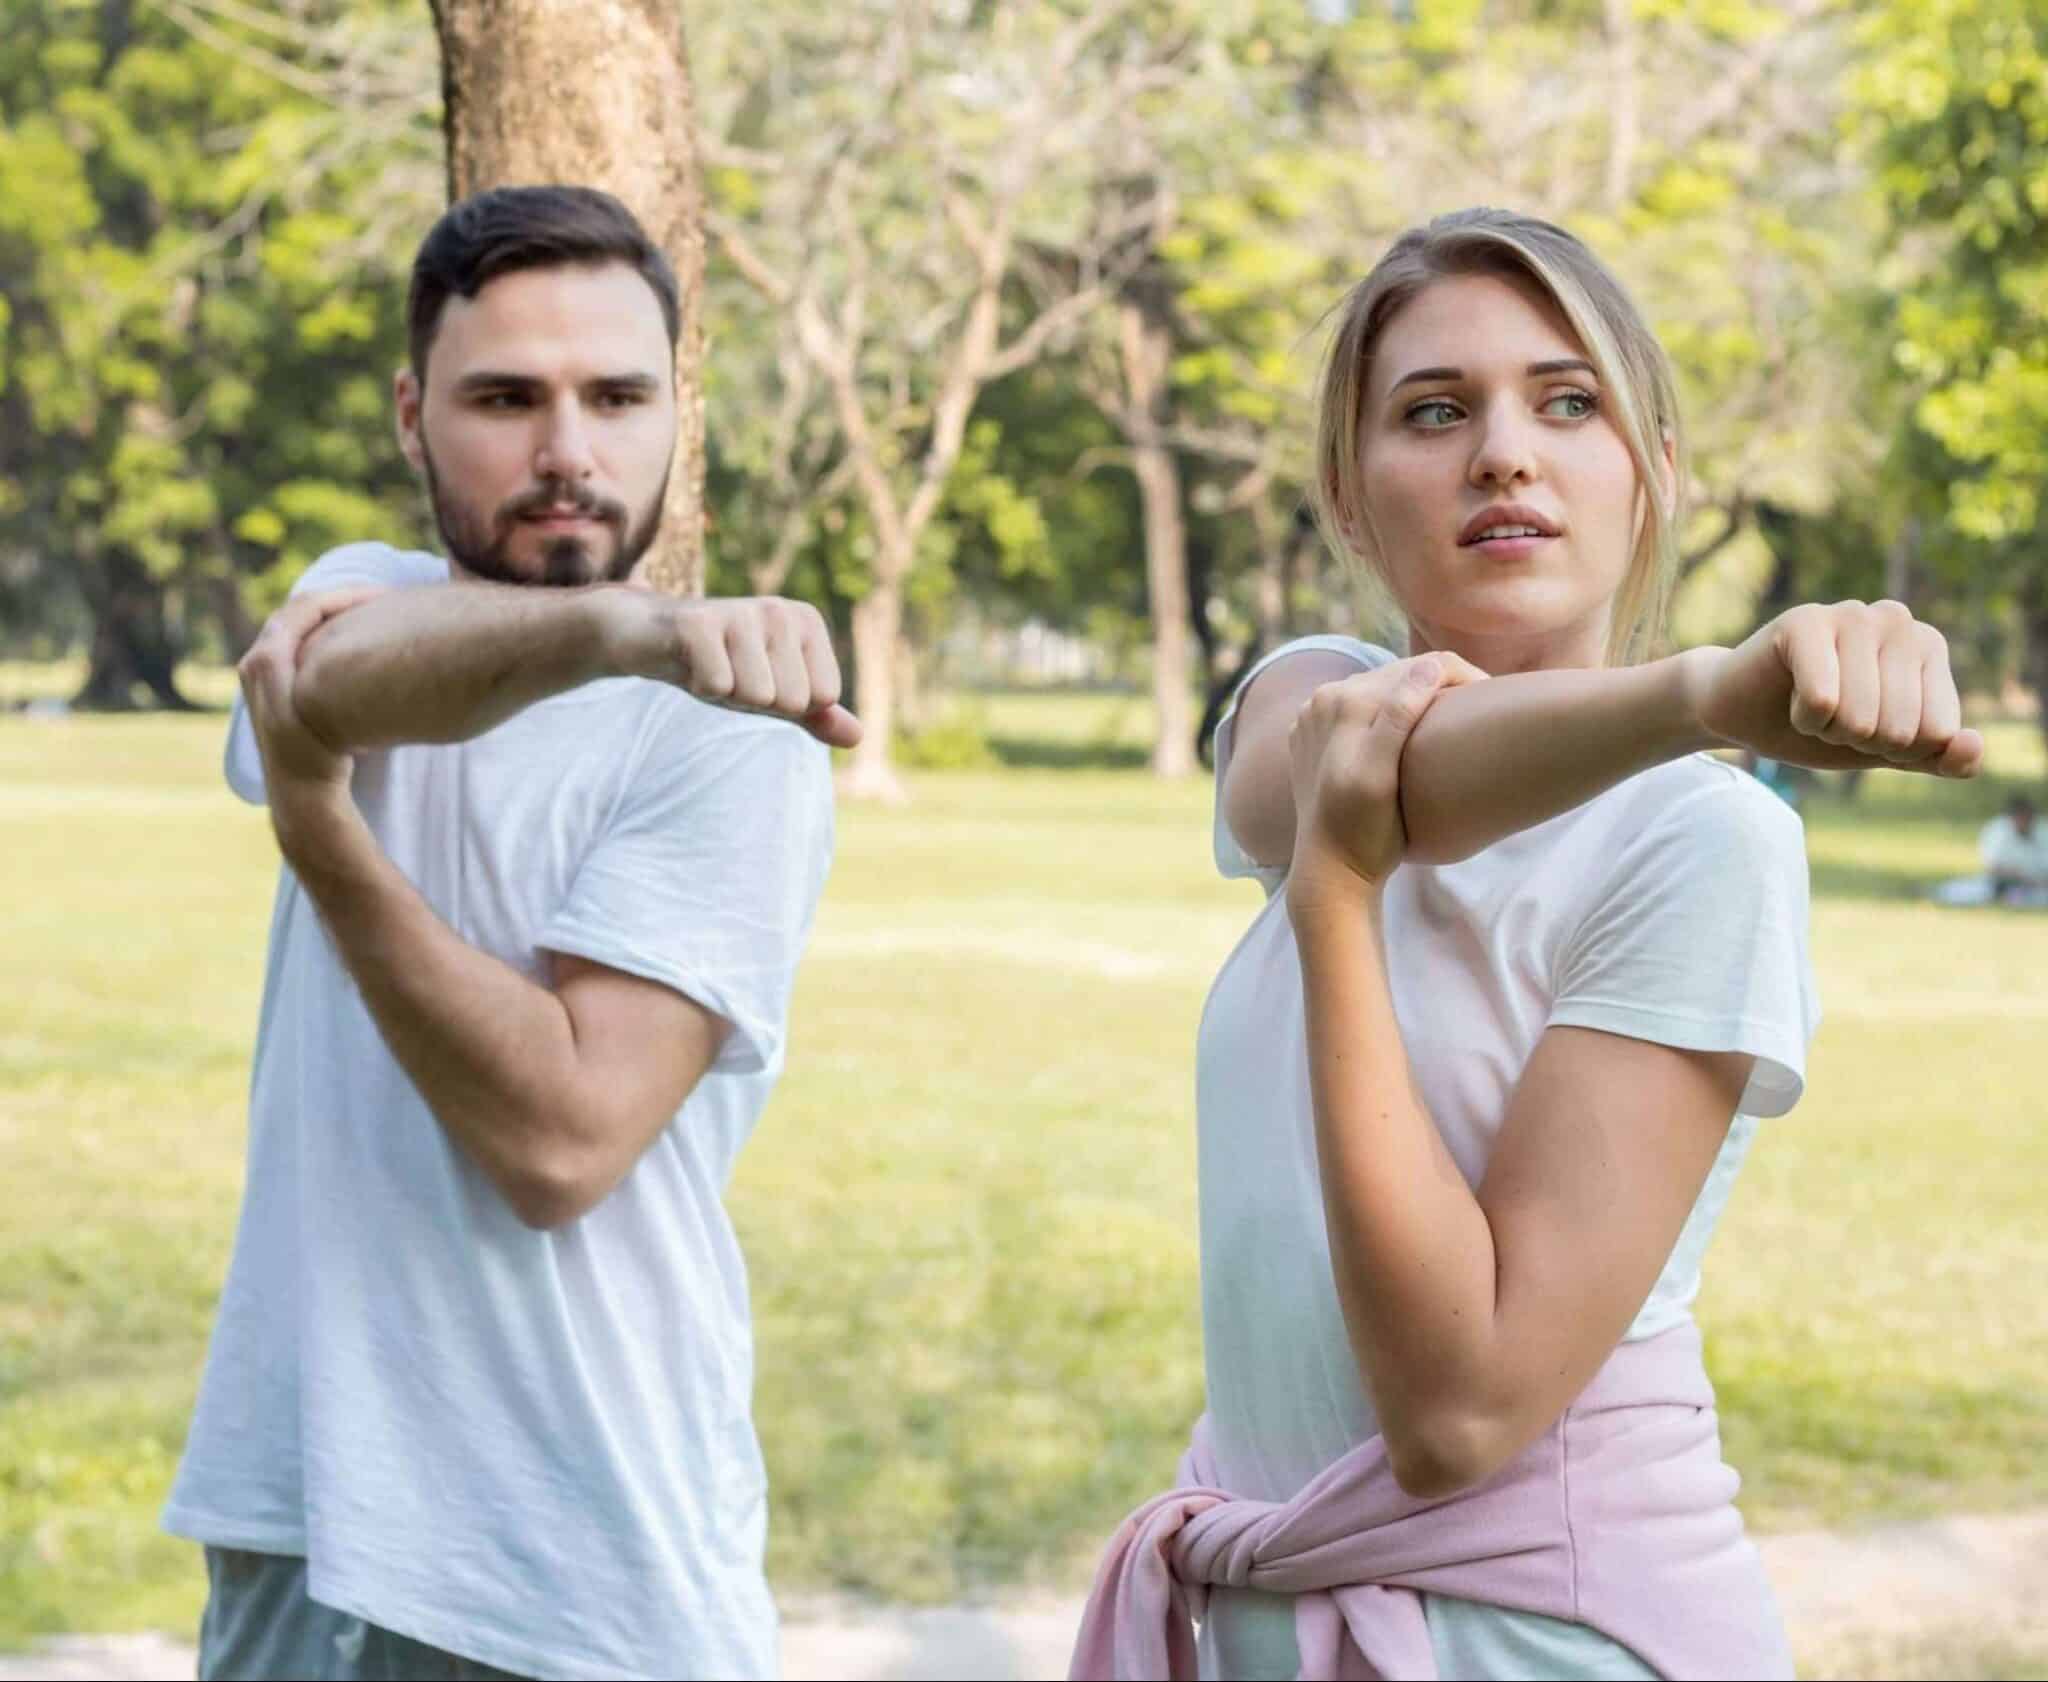 Young Caucasian couples exercise together in the park.